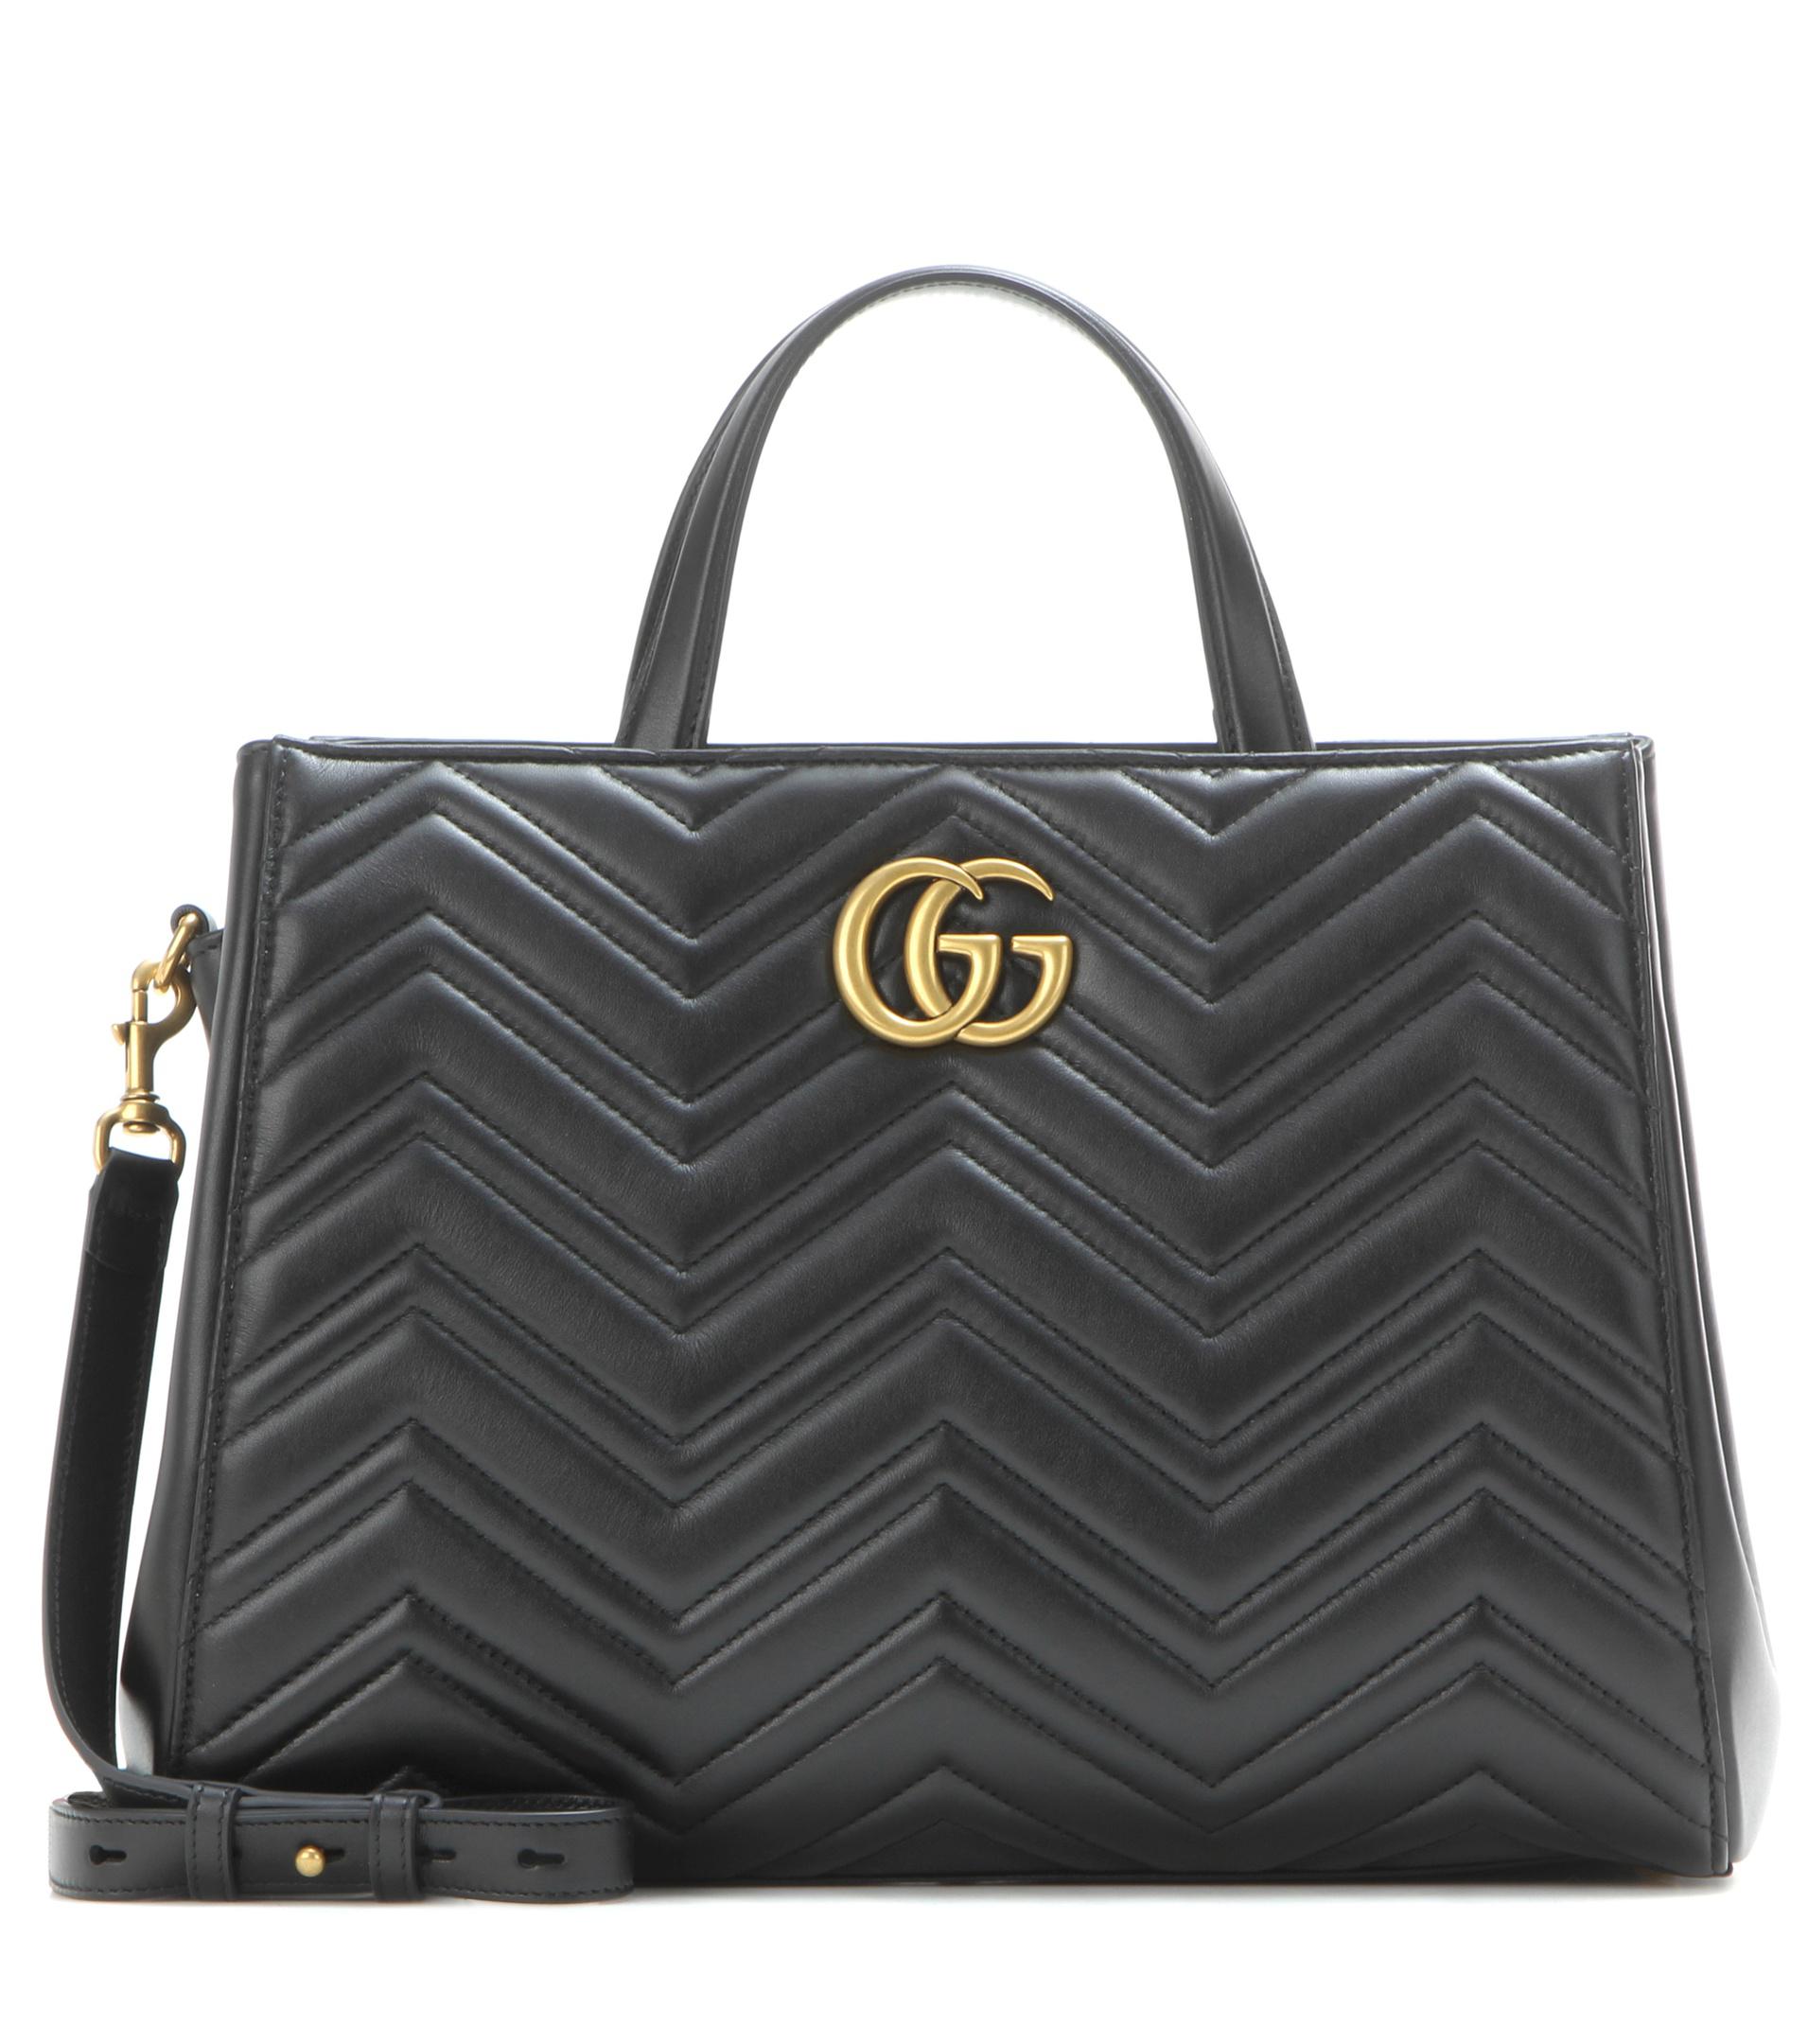 Gucci Gg Marmont Matelassé Leather Tote in Black | Lyst